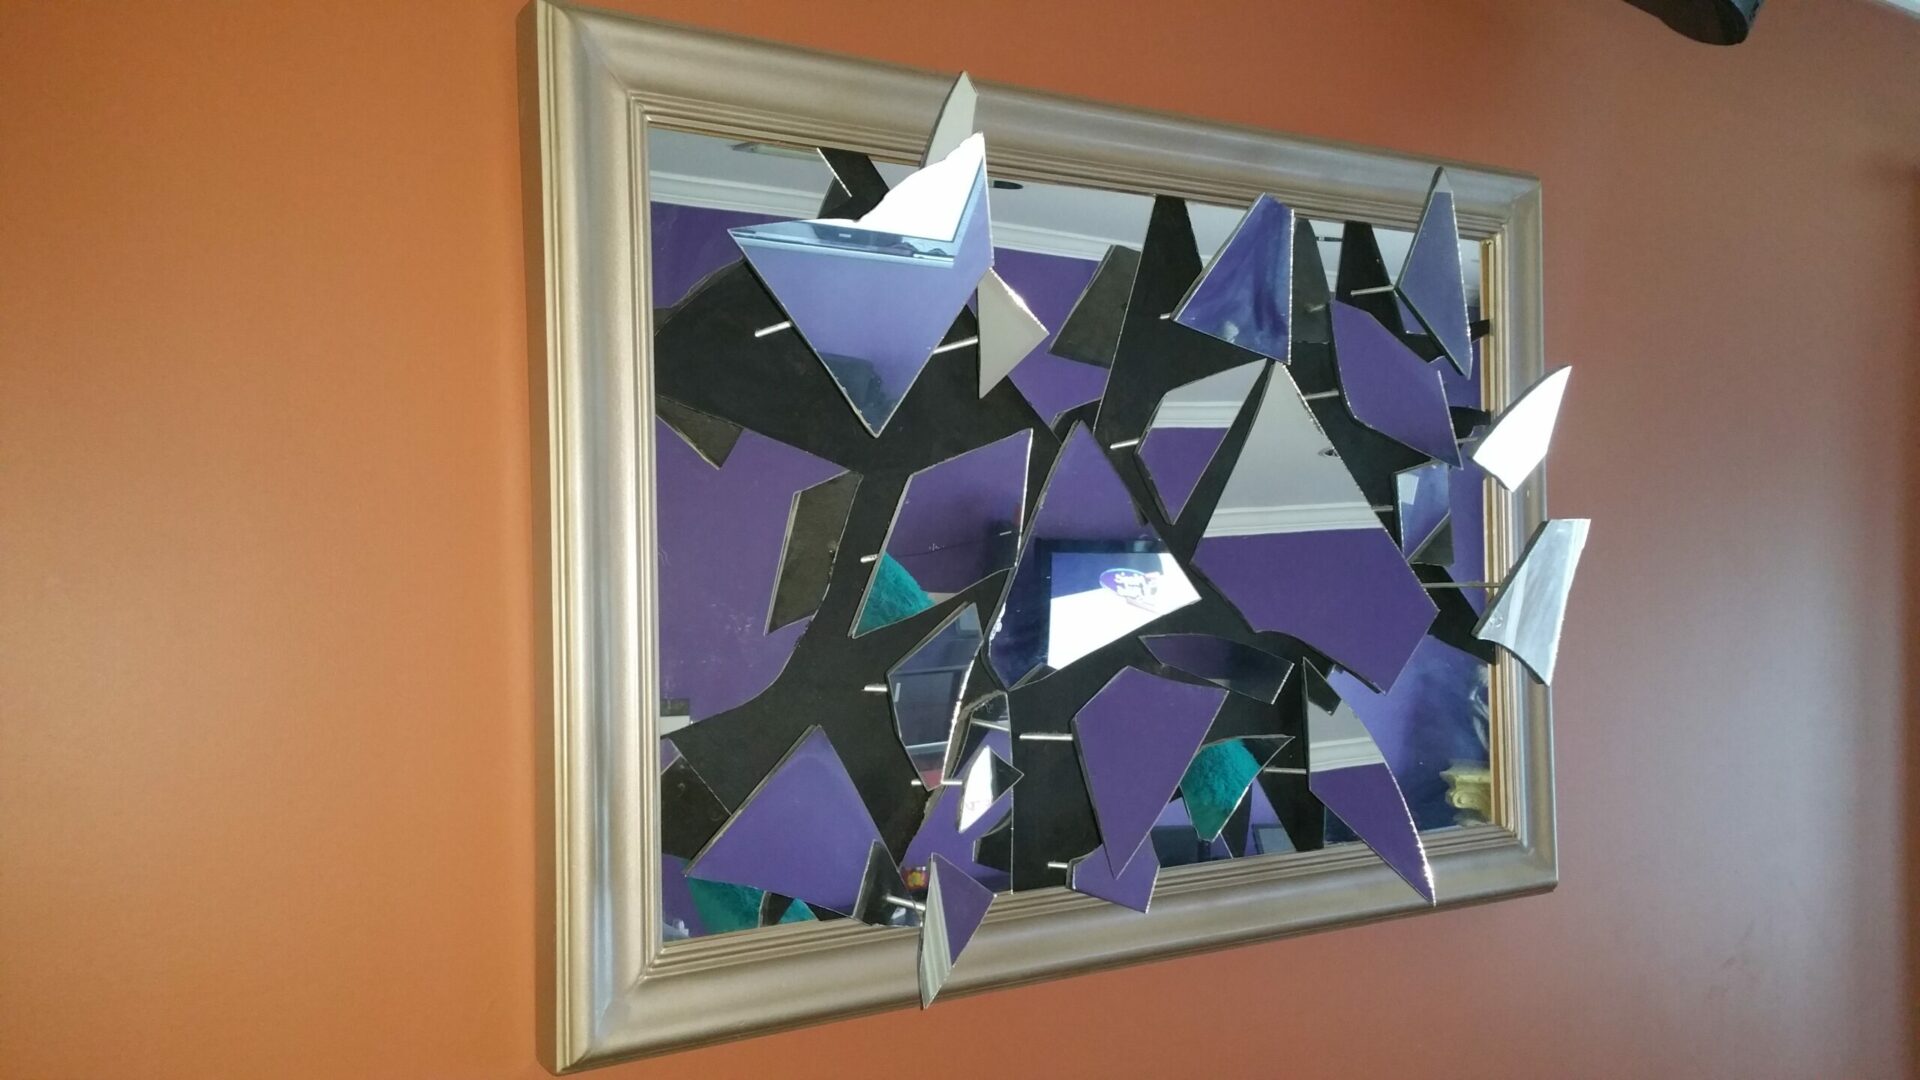 A mirror with purple and black broken mirrors on it.